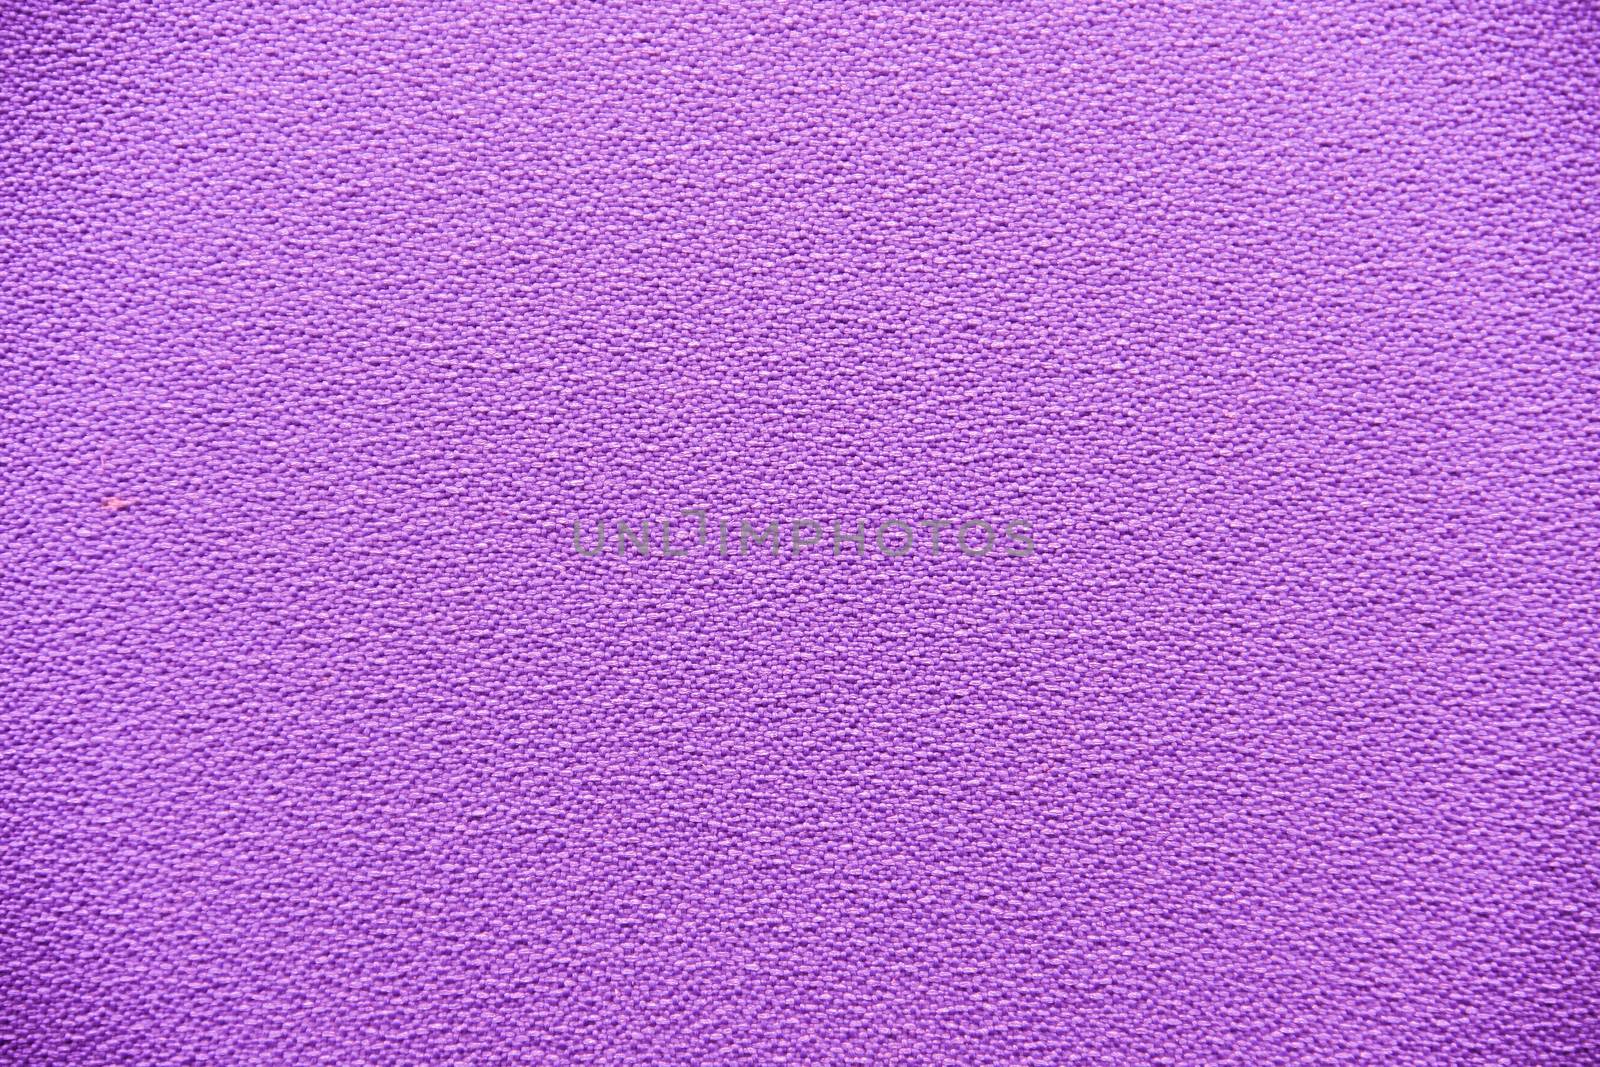 texture of pink fabric Upholstery for use backgrounds